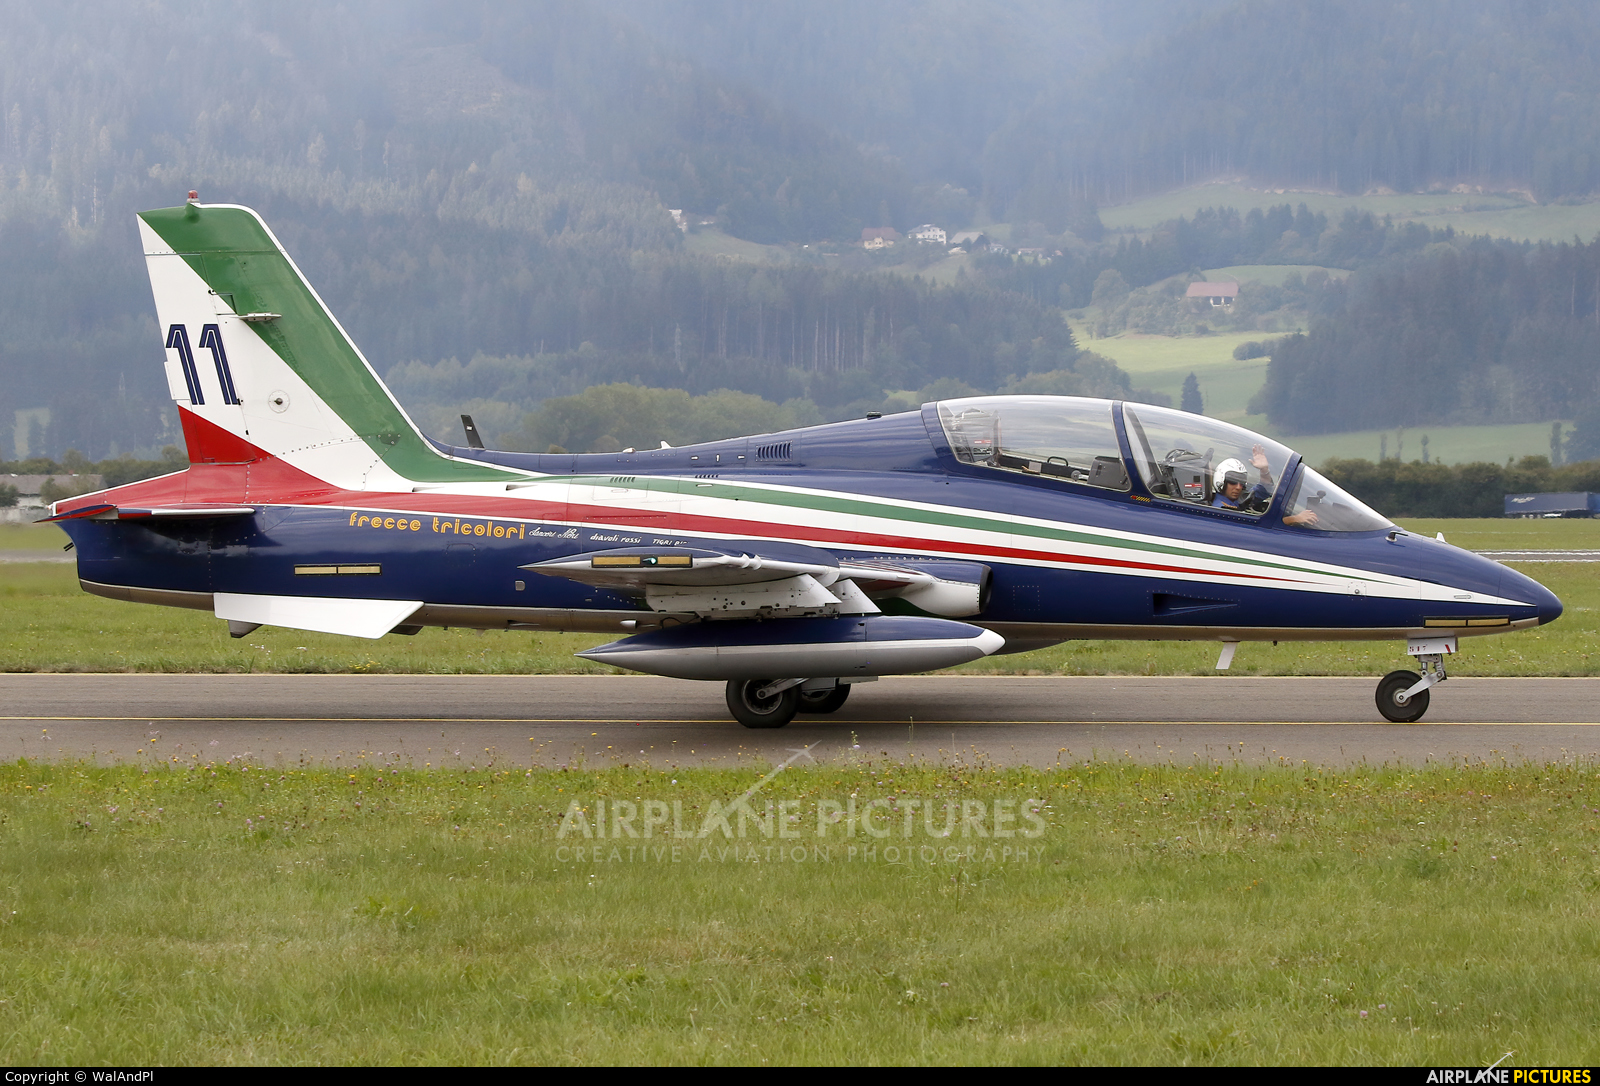 Italy - Air Force "Frecce Tricolori" MM54517 aircraft at Zeltweg